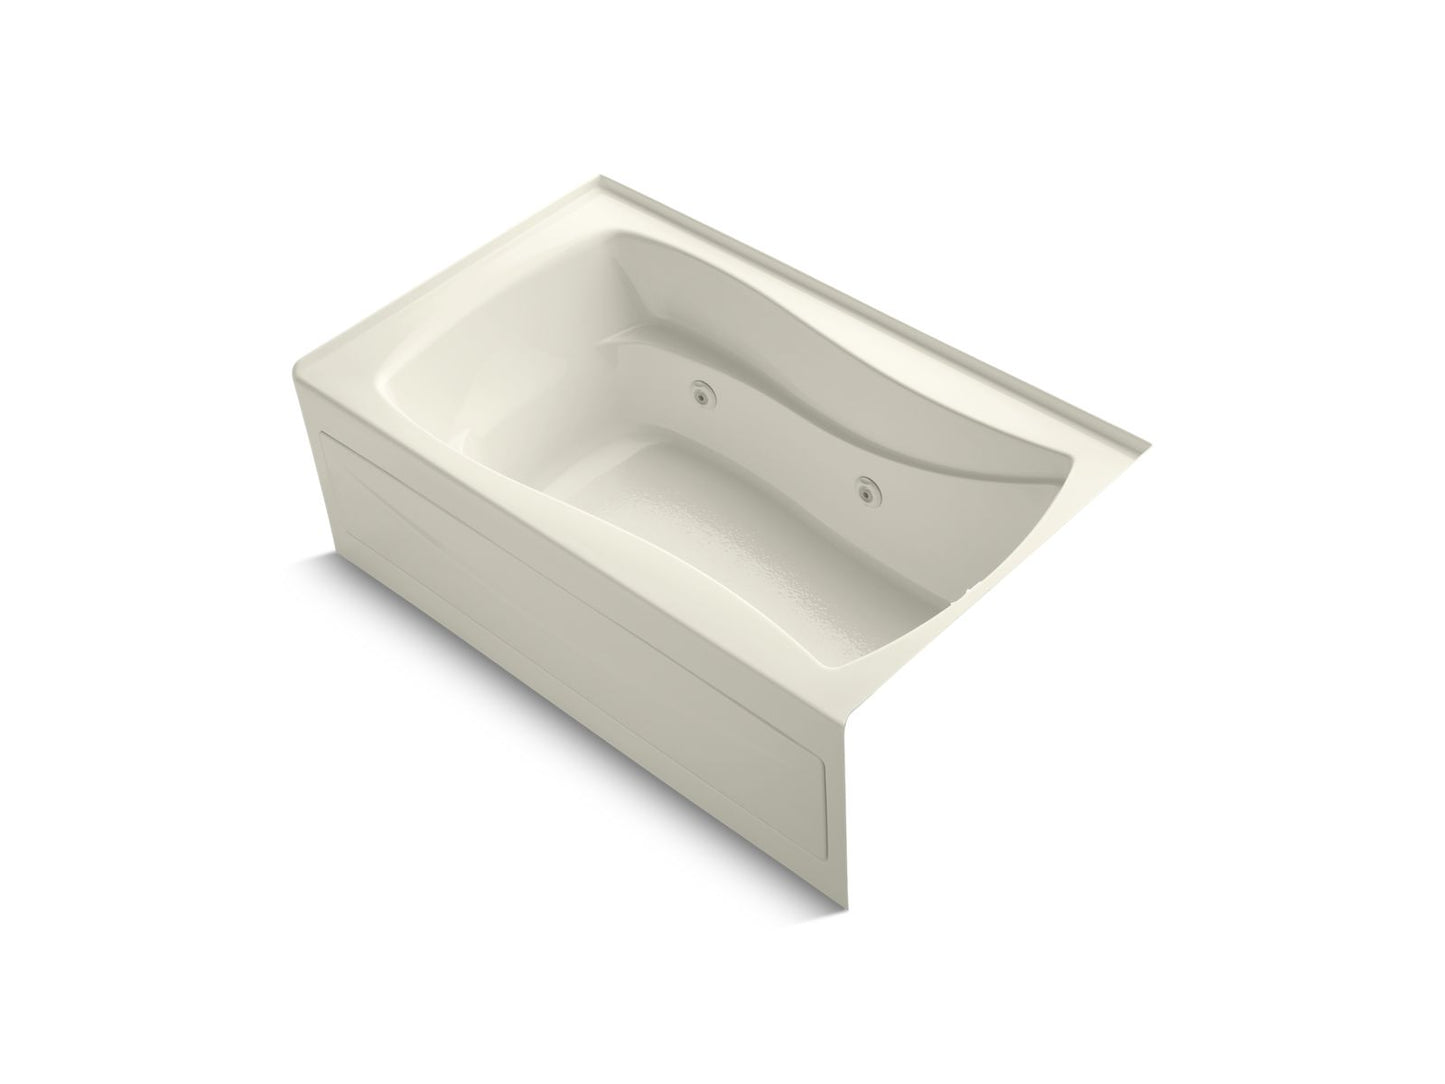 KOHLER K-1239-RA-96 Mariposa 60" X 36" Alcove Whirlpool, Right Drain And Adjustable Jets In Biscuit